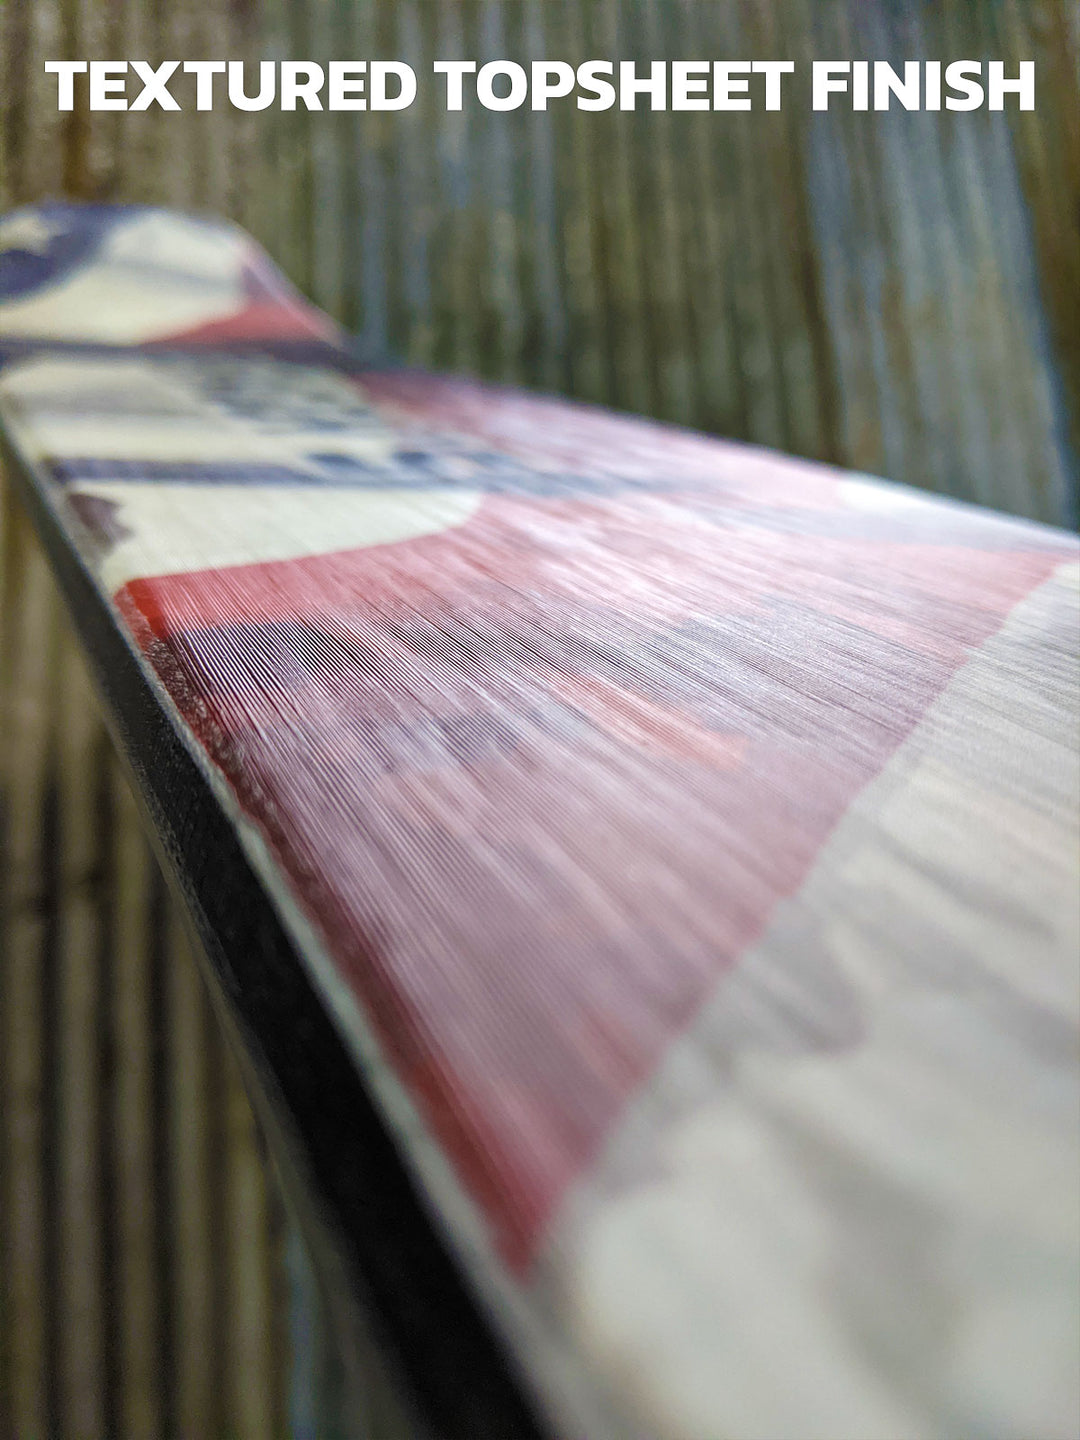 Limited Edition America! Skis